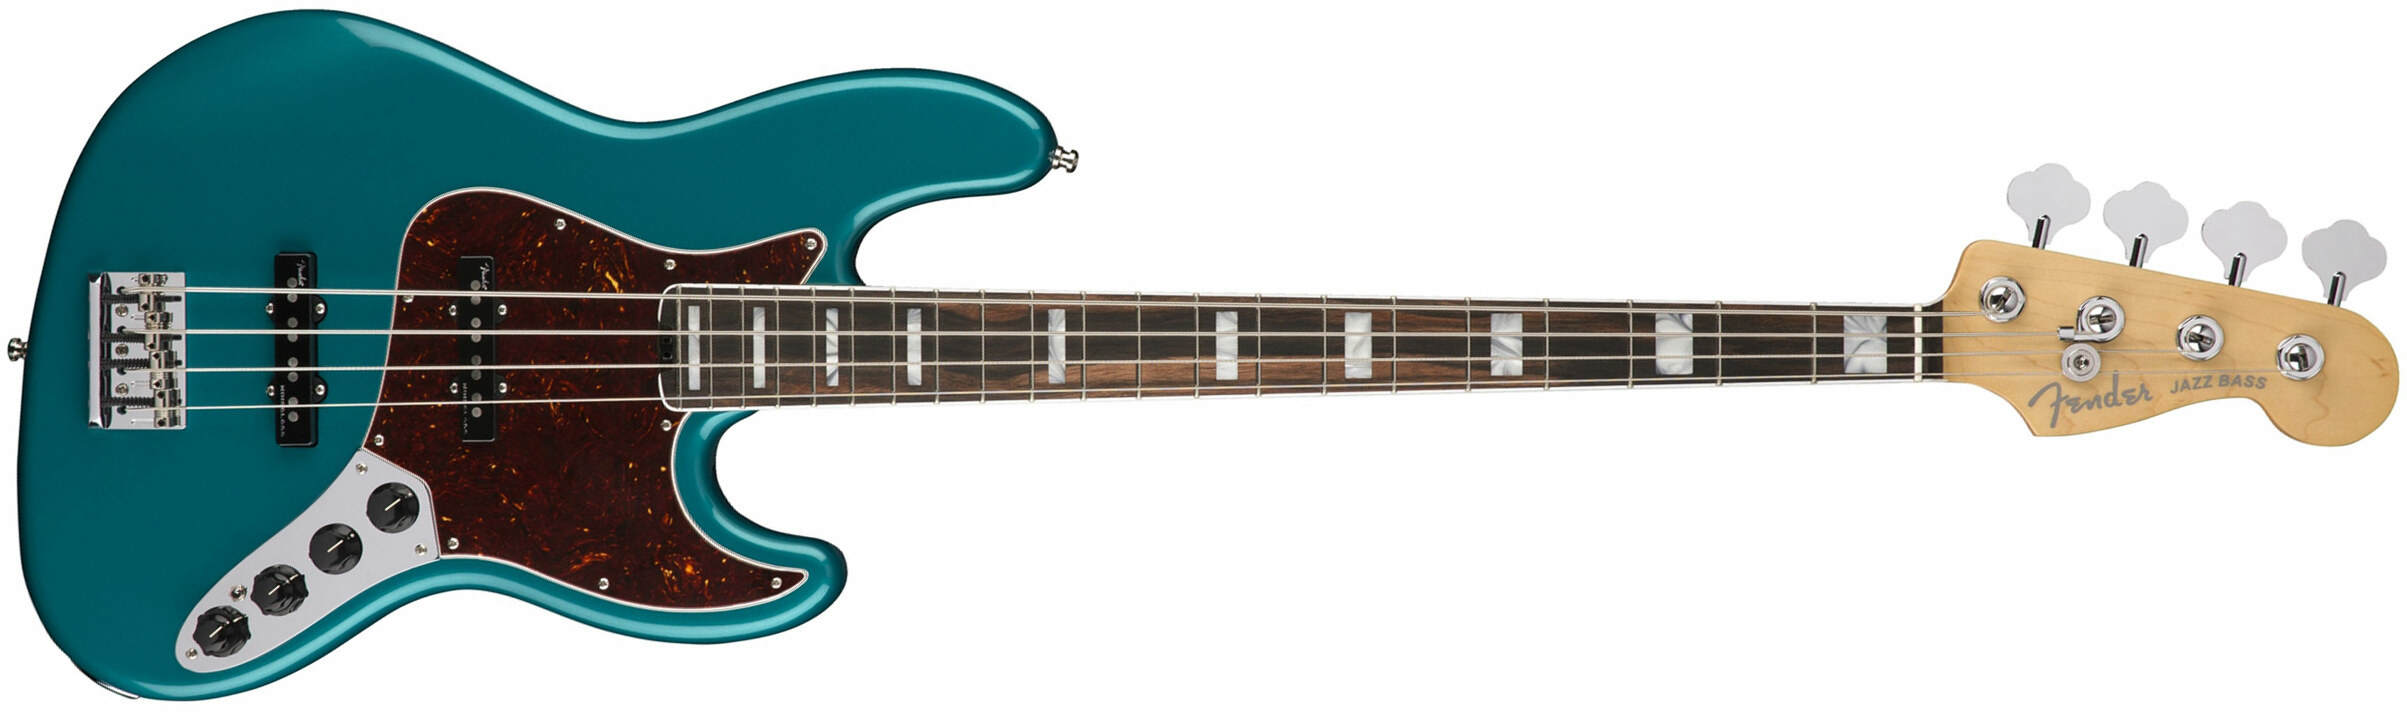 Fender American Elite Jazz Bass 2018 Usa Eb - Ocean Turquoise - Solidbody E-bass - Main picture